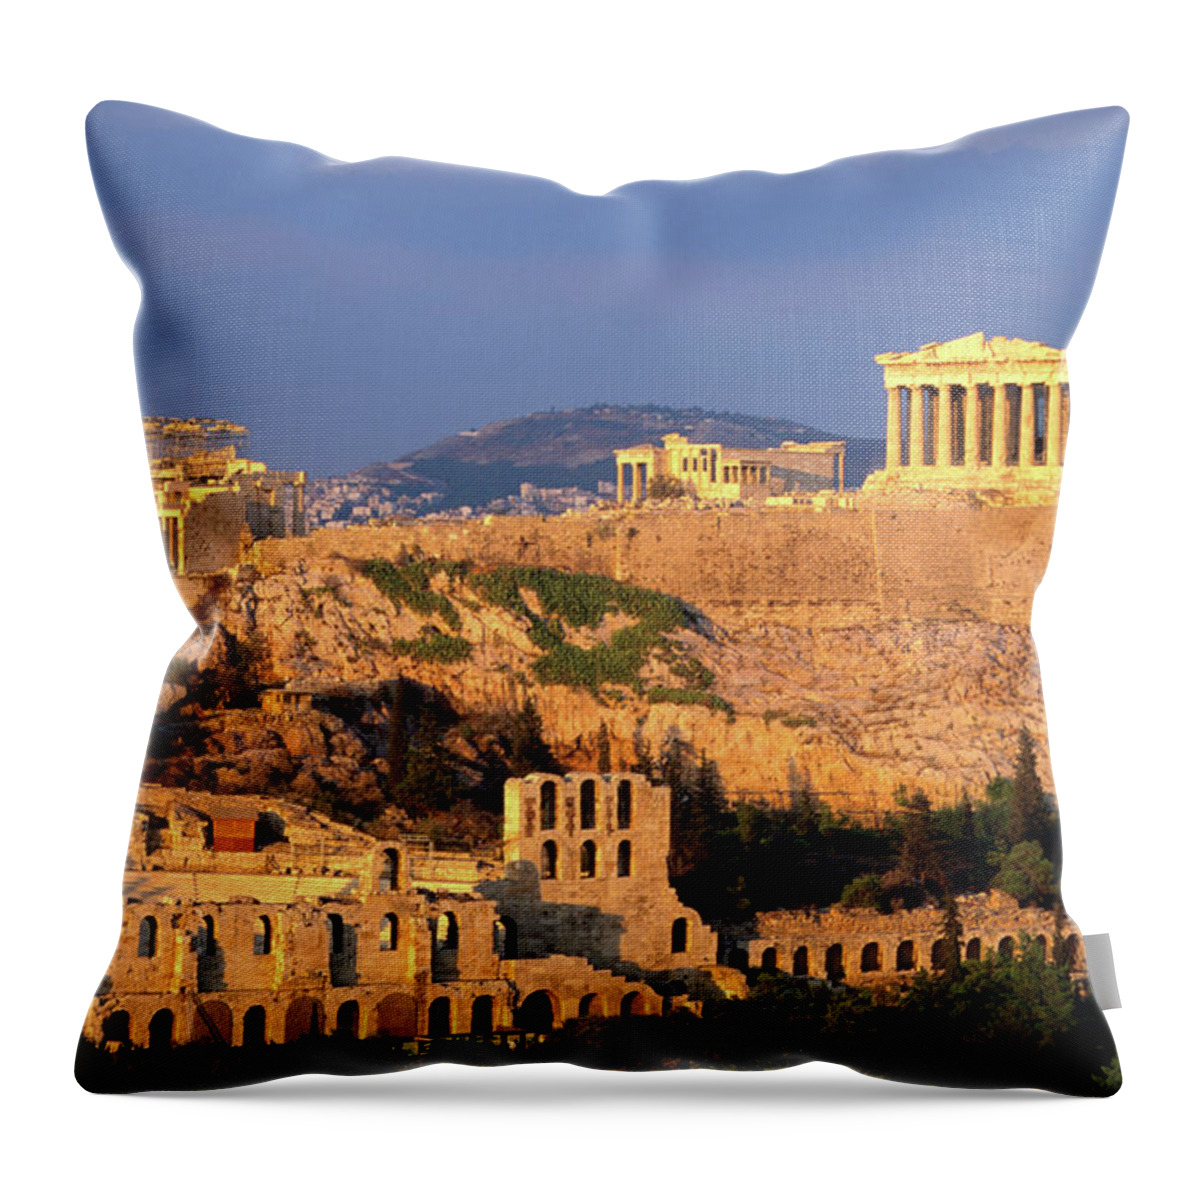 Greece Throw Pillow featuring the photograph The Acropolis Taken From Phiopappos by John Elk Iii